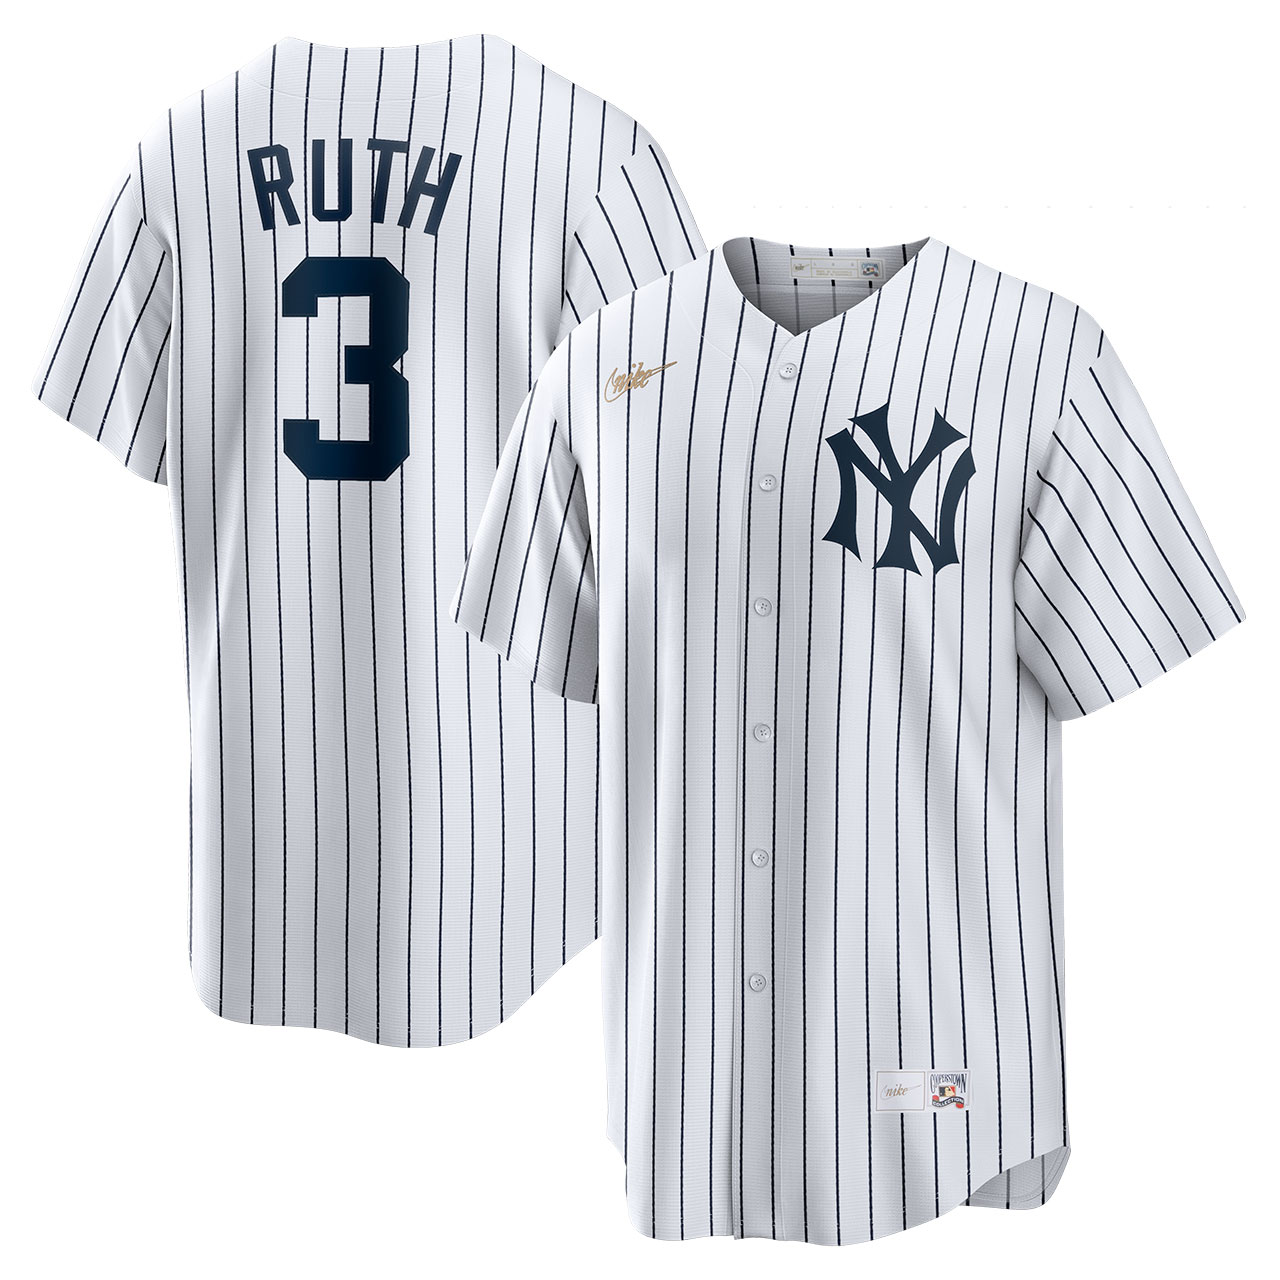 Men's New York Yankees Babe Ruth Nike Gray Road Cooperstown Collection –  Bleacher Bum Collectibles